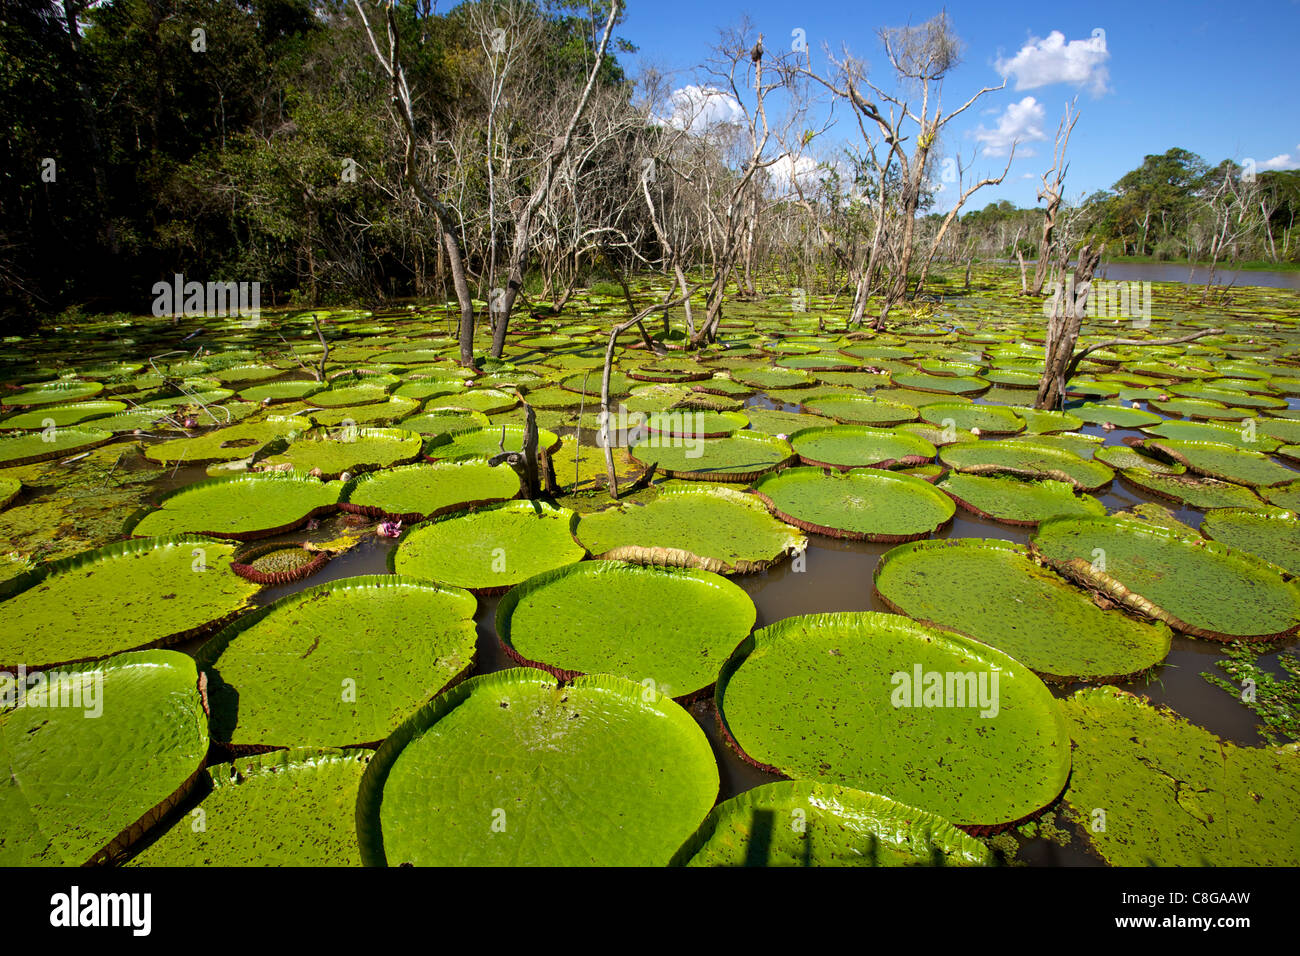 Giant lily leaves and flower in the Amazonian forest, Manaus, Brazil Stock Photo